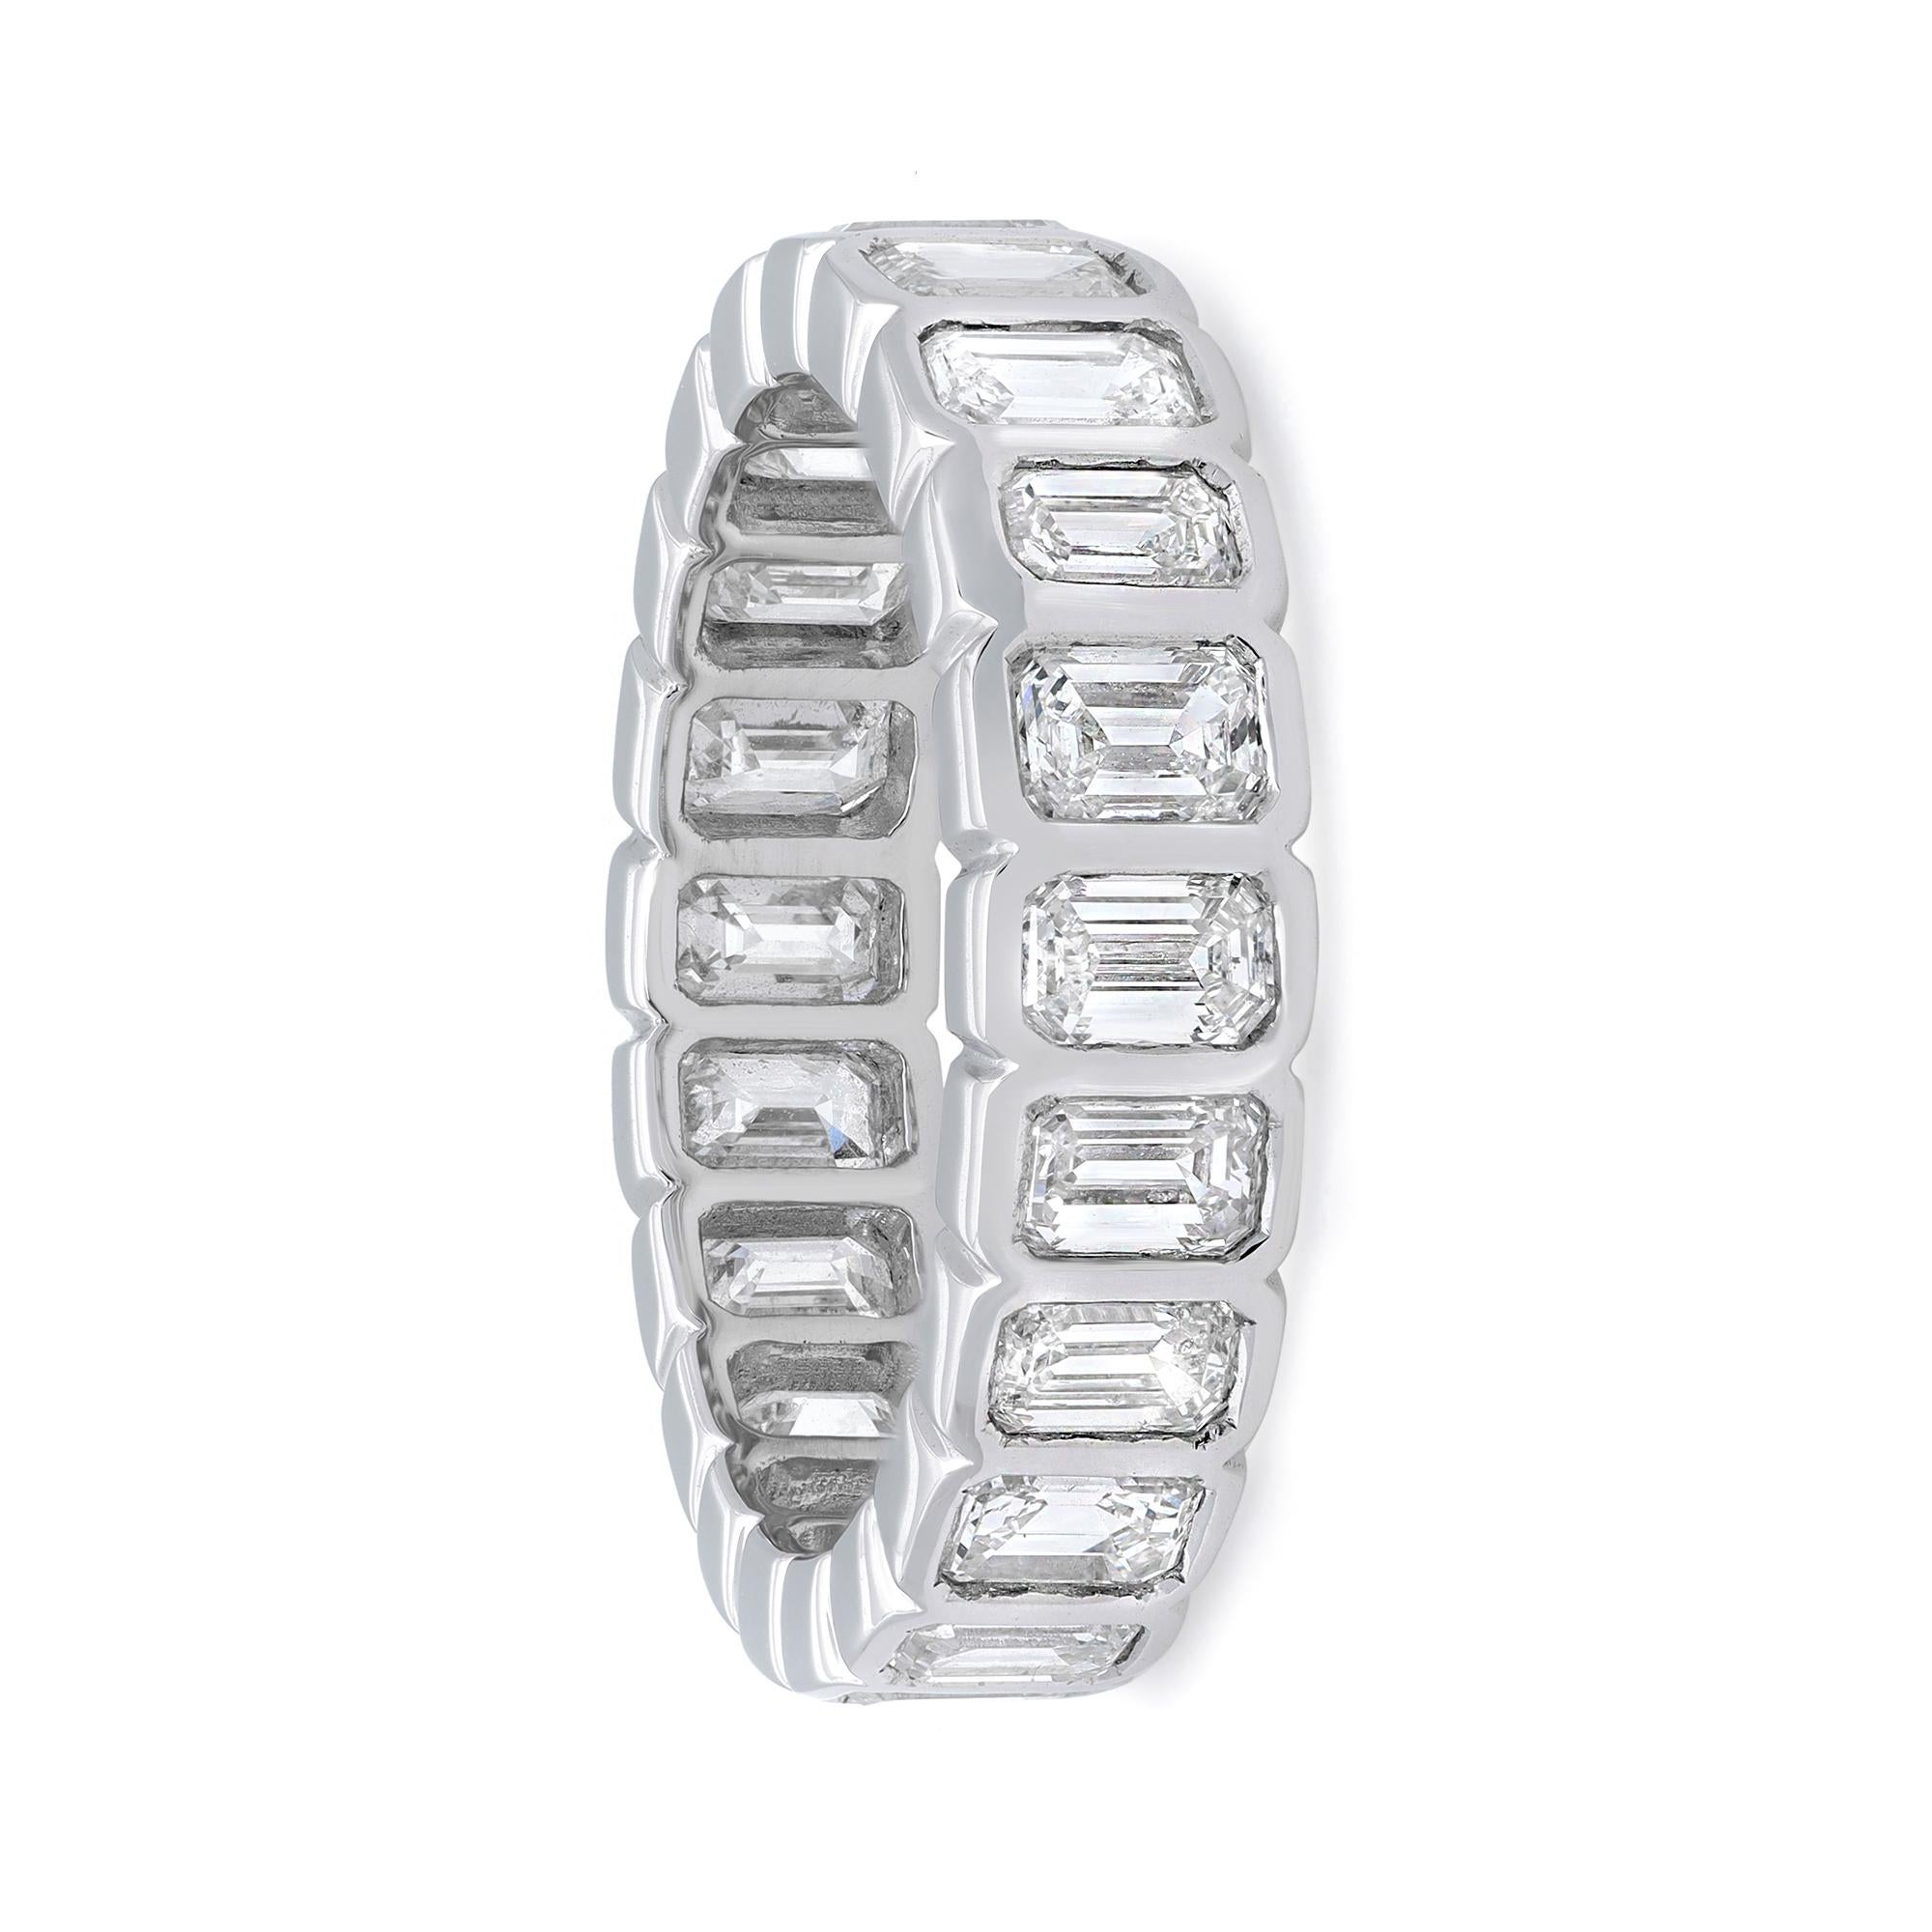 Celebrate everlasting love with this enchanting eternity band ring. Crafted in high polished 14K white gold. Showcasing 21 bezel set emerald cut dazzling diamonds beautifully encircling all the way around the band. Total diamond weight: 3.12 carats.